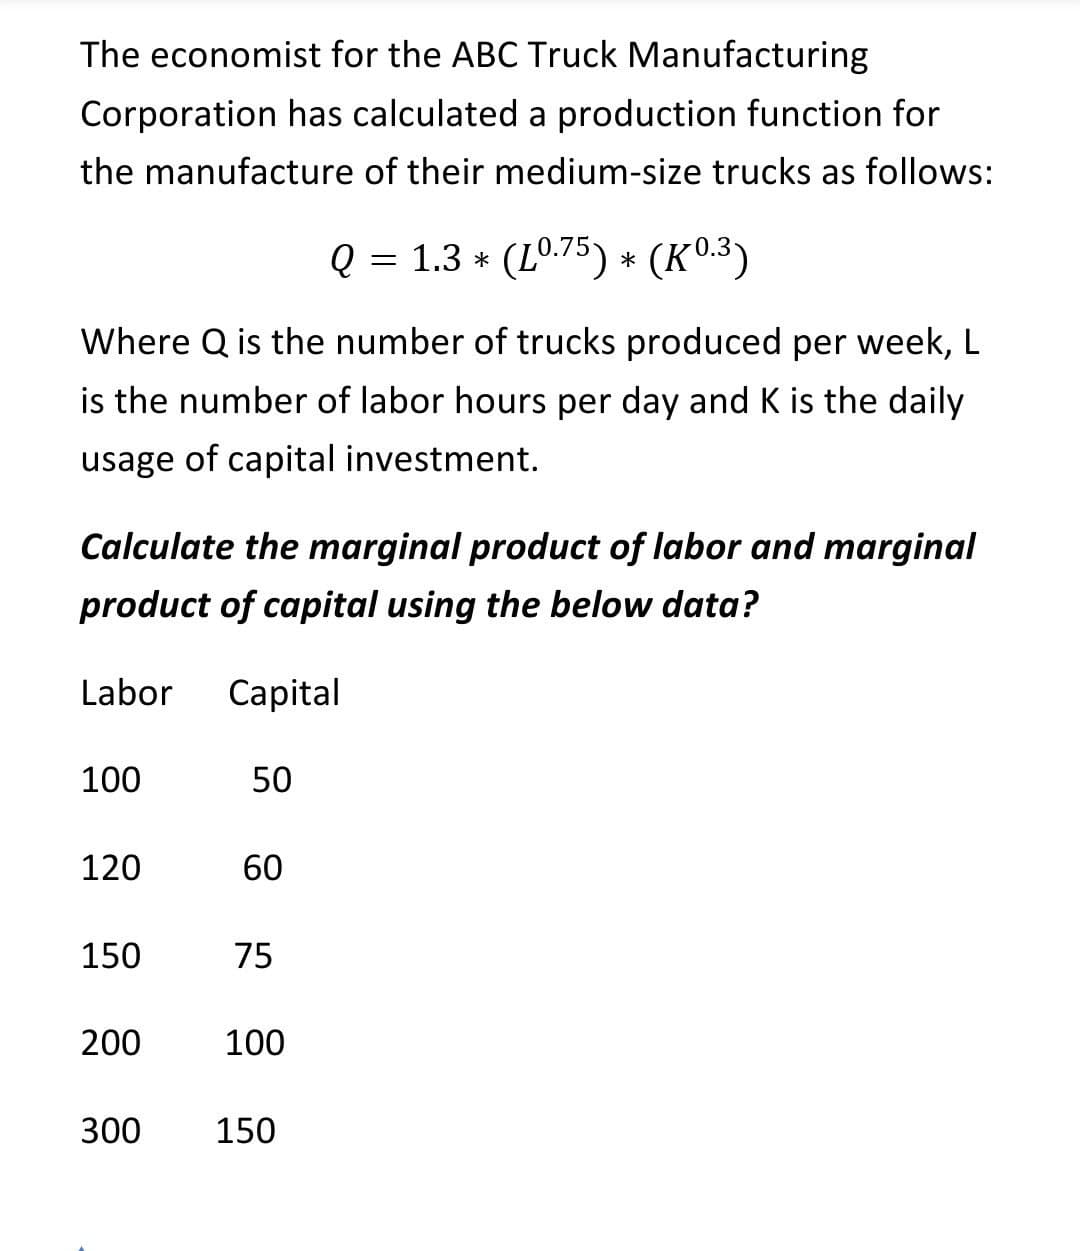 The economist for the ABC Truck Manufacturing
Corporation has calculated a production function for
the manufacture of their medium-size trucks as follows:
Q = 1.3 * (L0.75) * (K0.3)
Where Q is the number of trucks produced per week, L
is the number of labor hours per day and K is the daily
usage of capital investment.
Calculate the marginal product of labor and marginal
product of capital using the below data?
Labor
Capital
100
50
120
60
150
75
200
100
300
150
